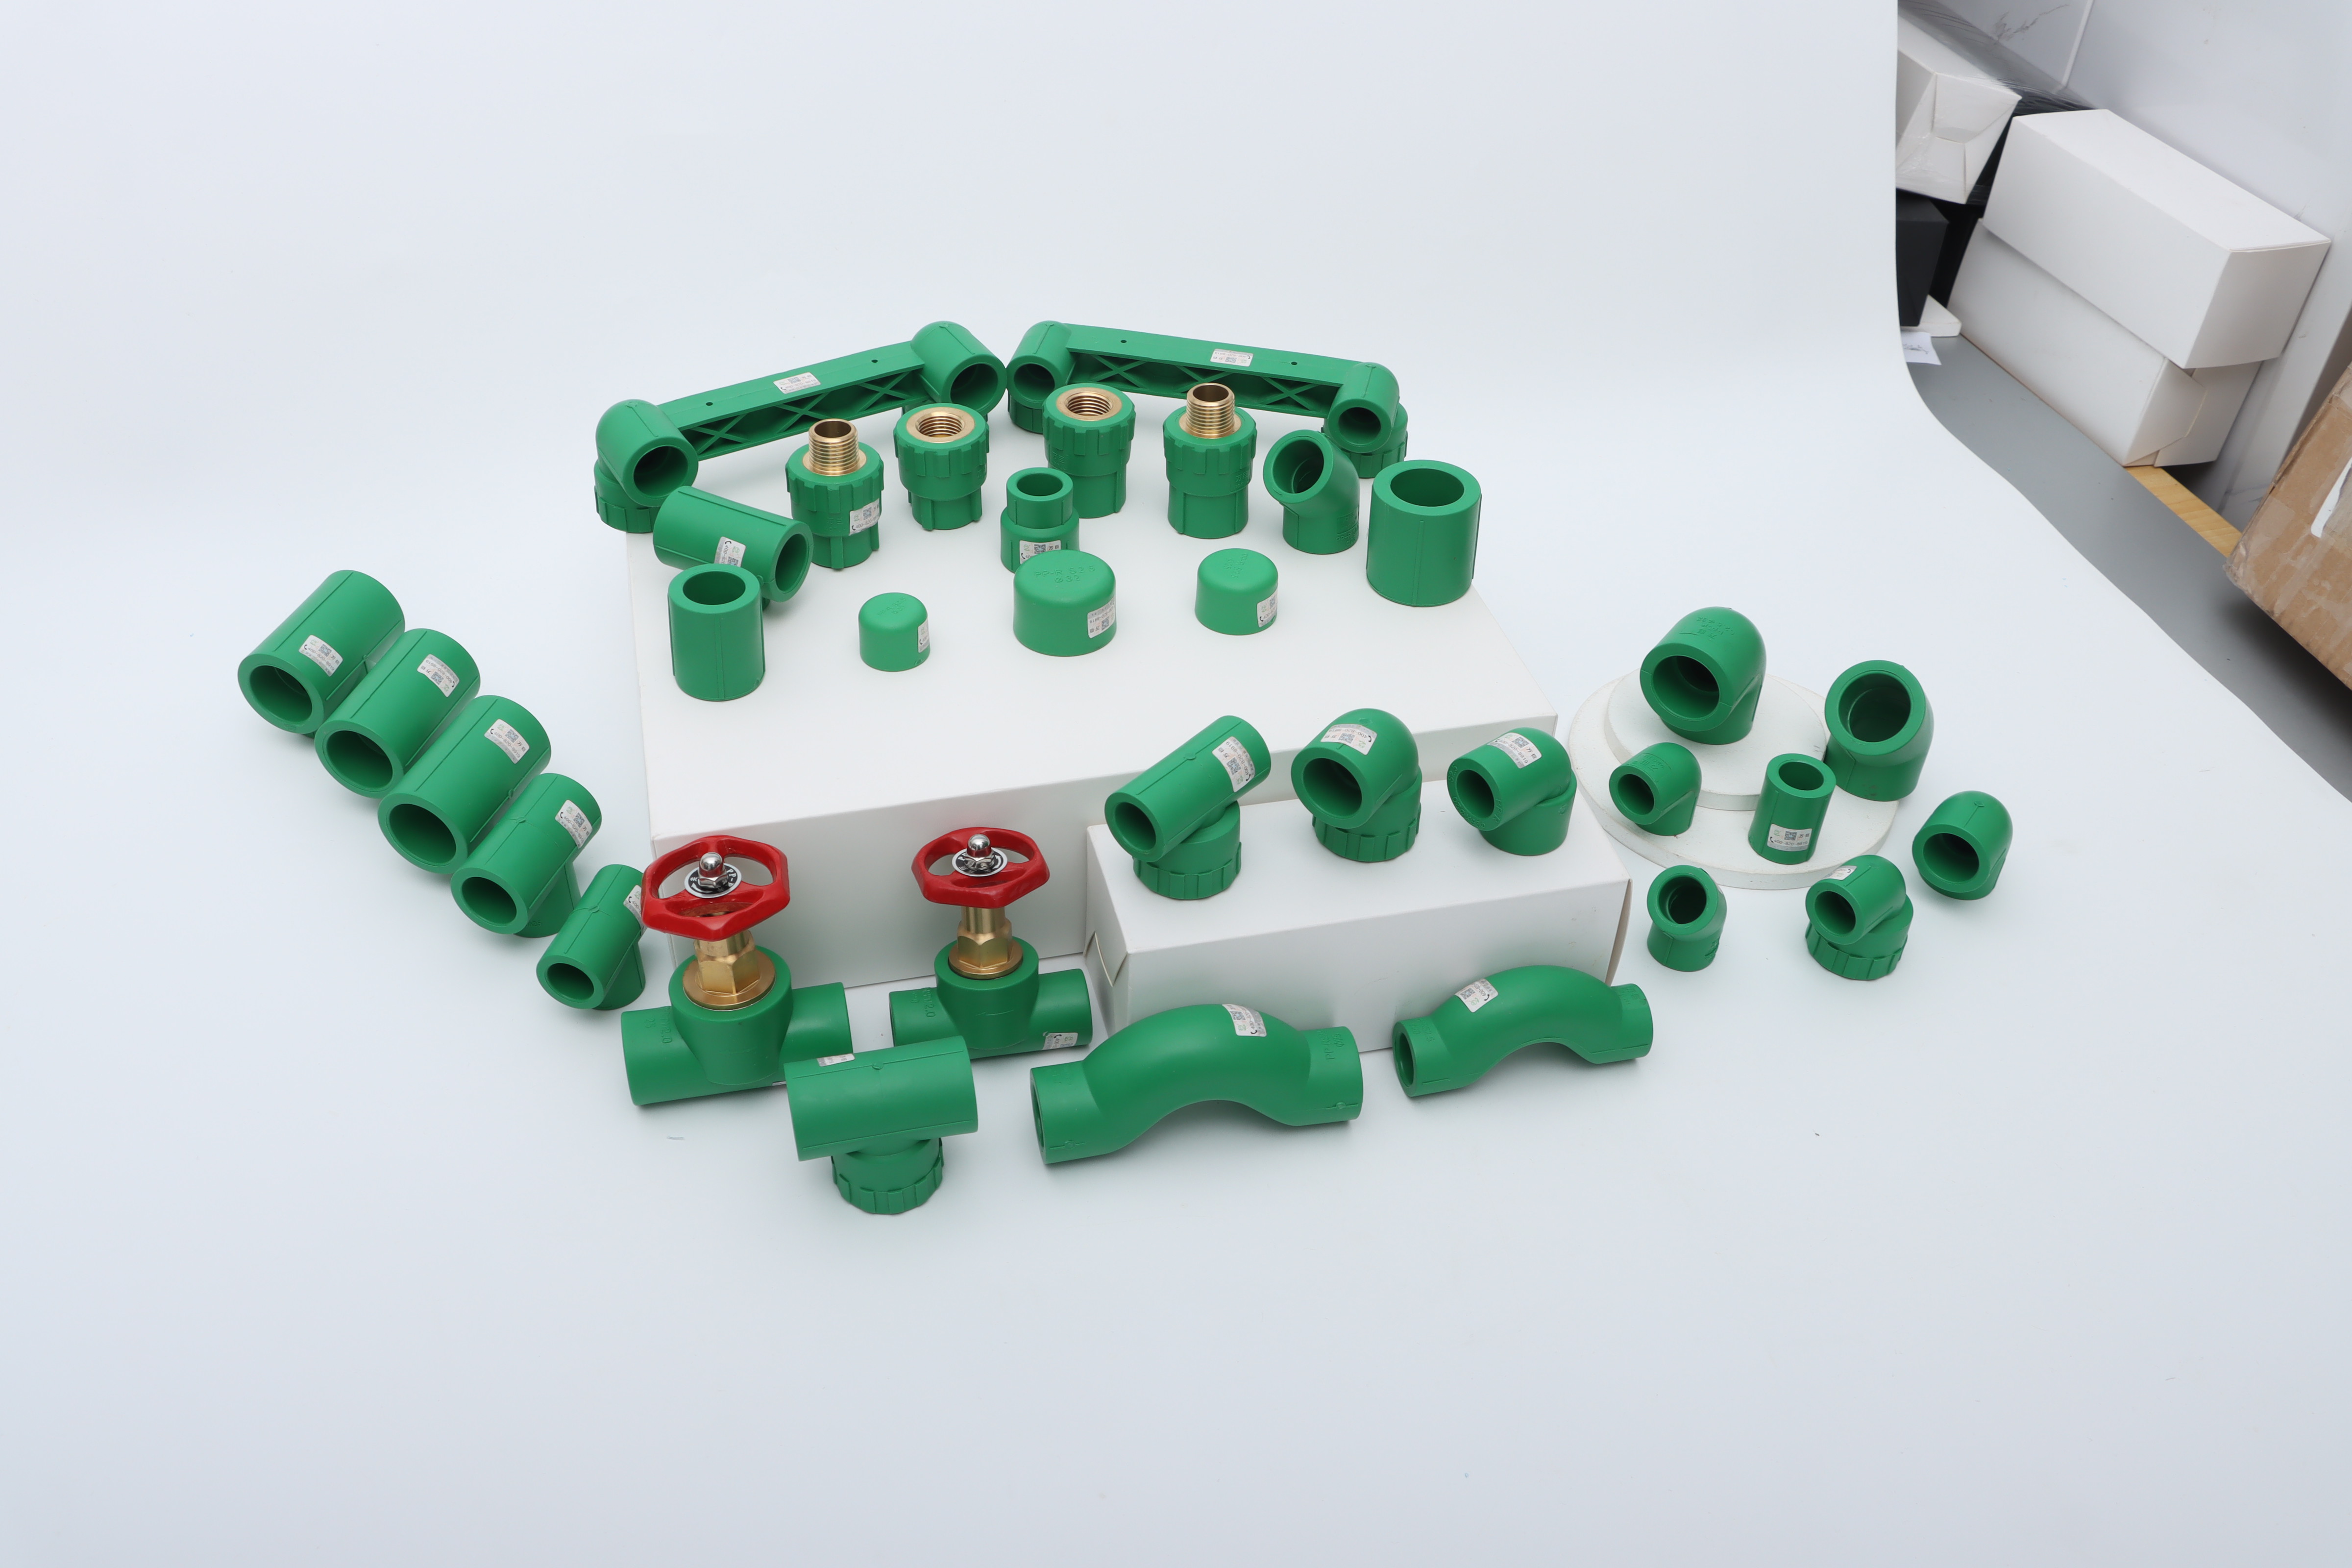 Factory Wholesale High Quality Custom Size Manual Adjustment Green Plastic PPR Stop Valve